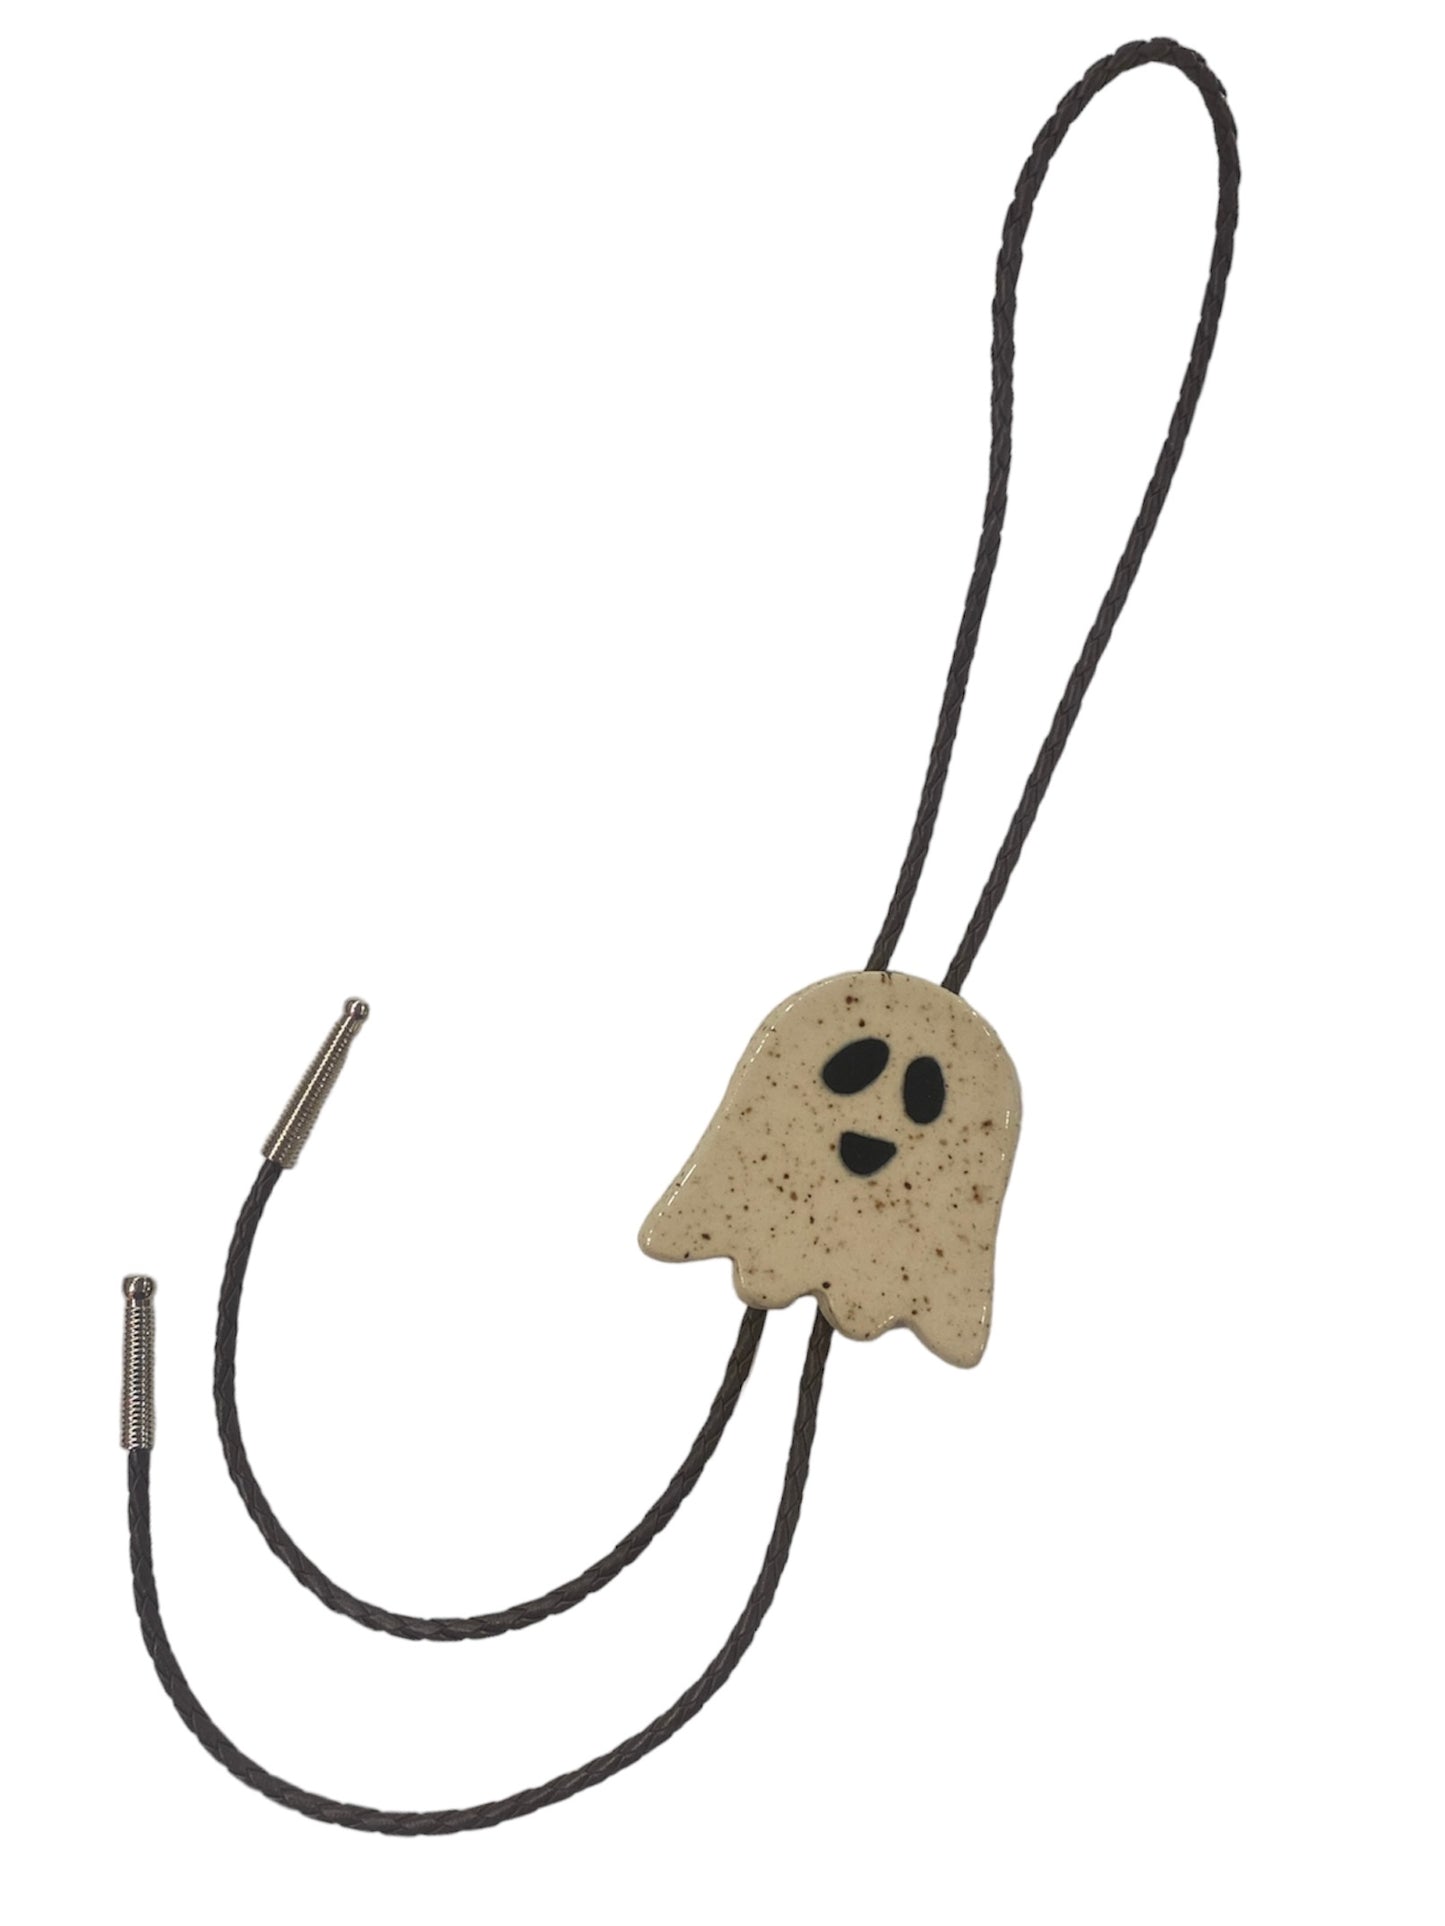 Handmade Ceramic Ghosty Bolo Tie by The Introverted Potter